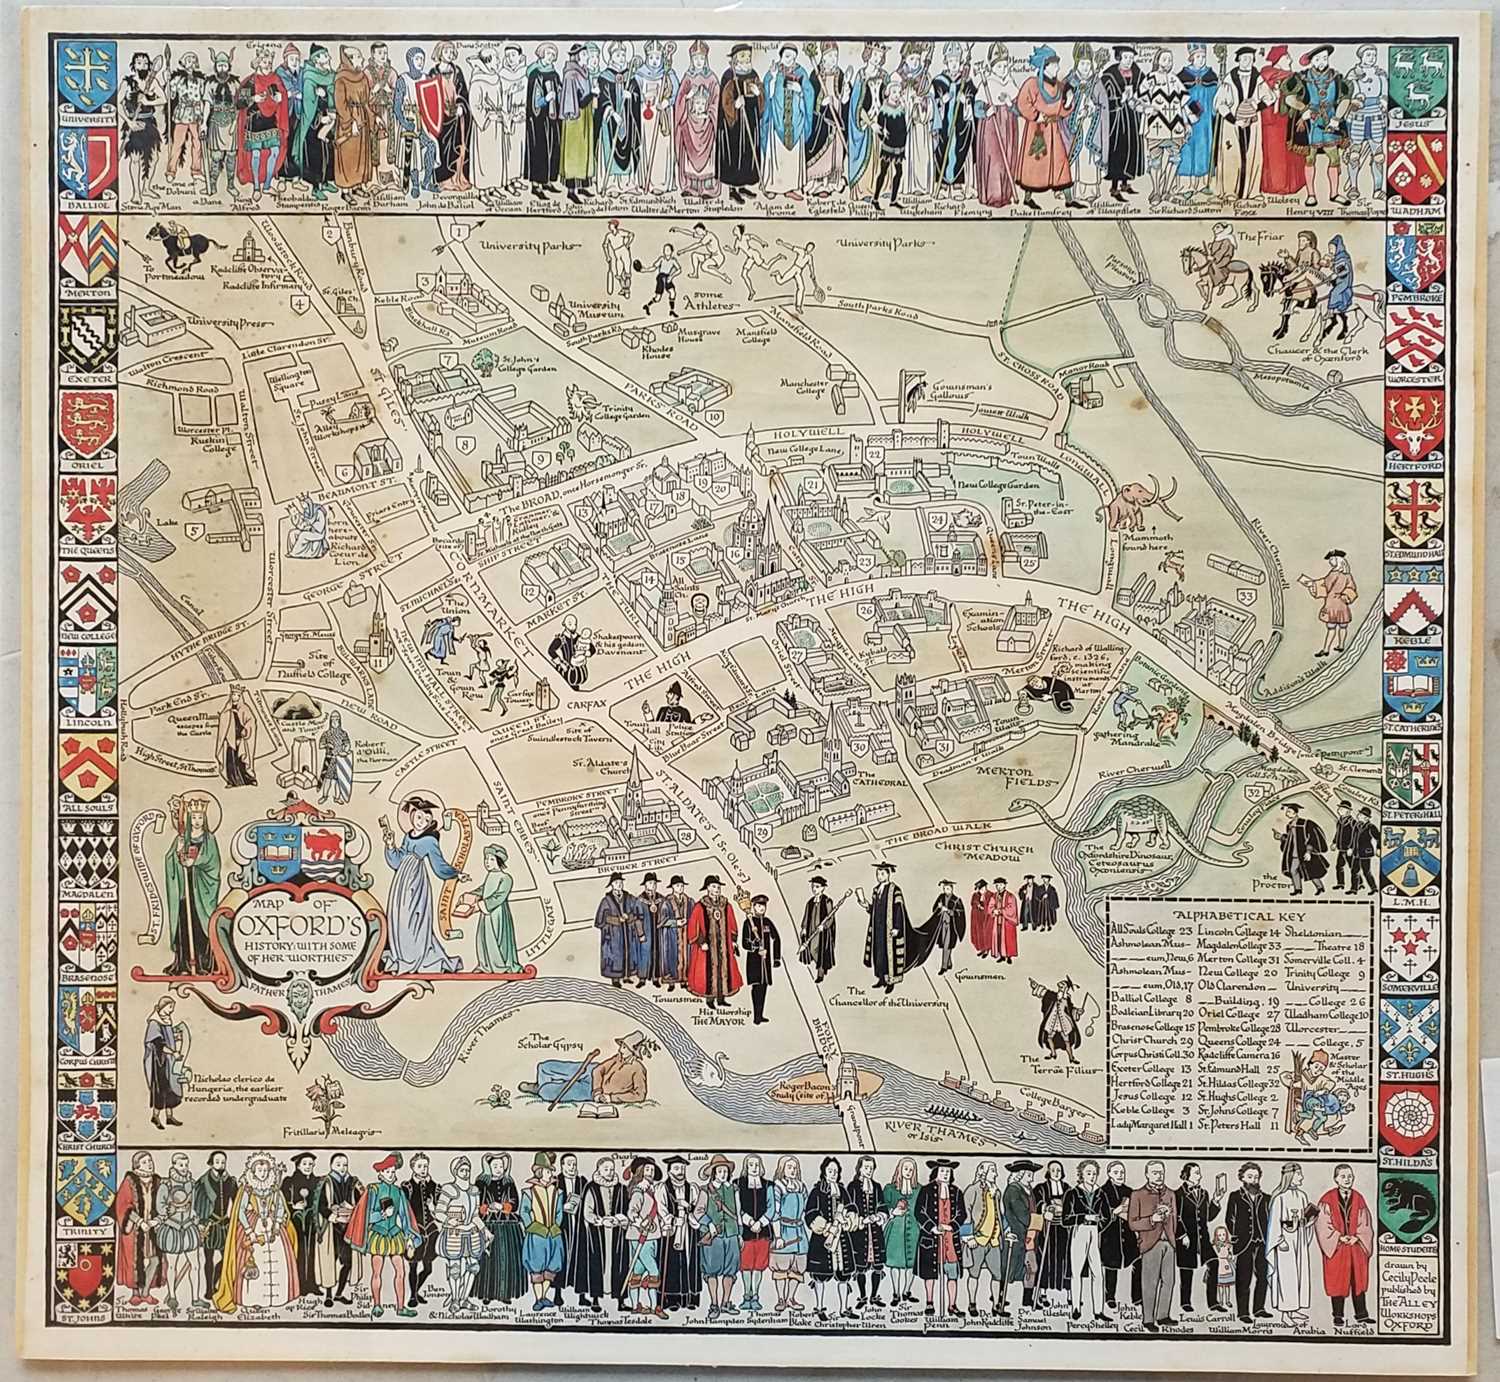 Lot 36 - Oxford. Peele (Cecily), Map of Oxford's History: With some of her Worthies, circa 1934